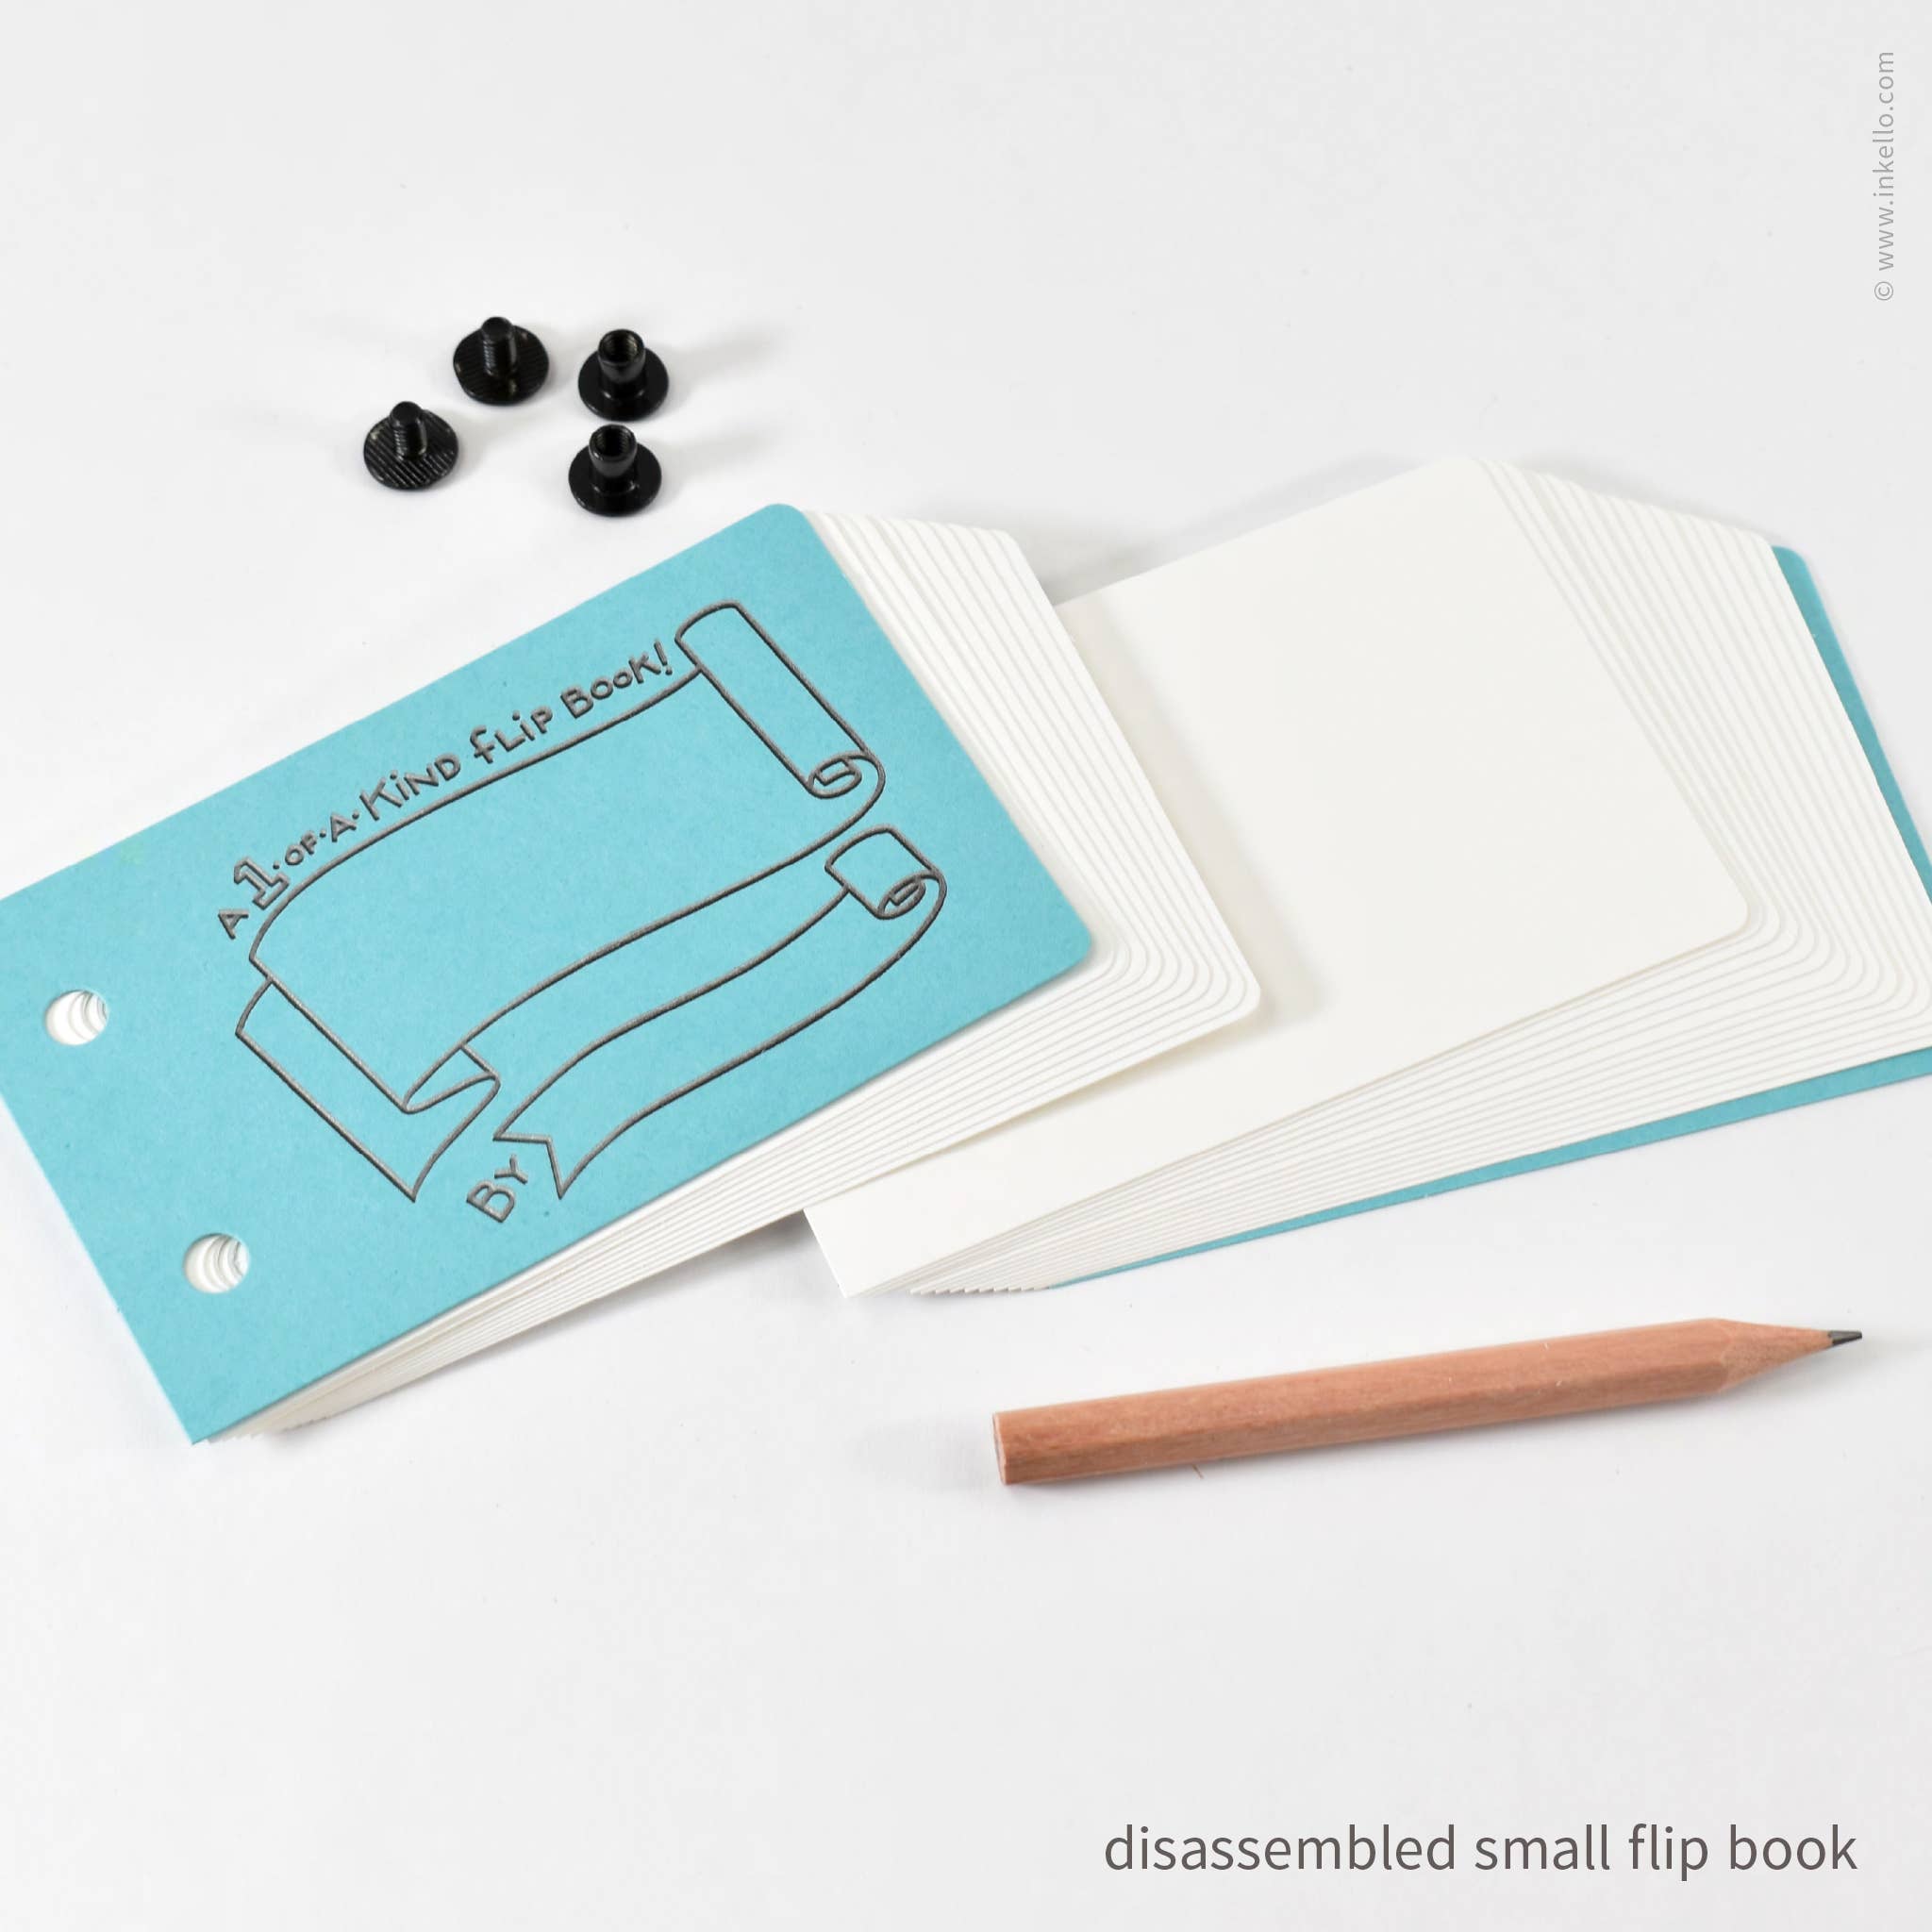 Blue Raspberry Draw-Your-Own Flip Book + Pencil